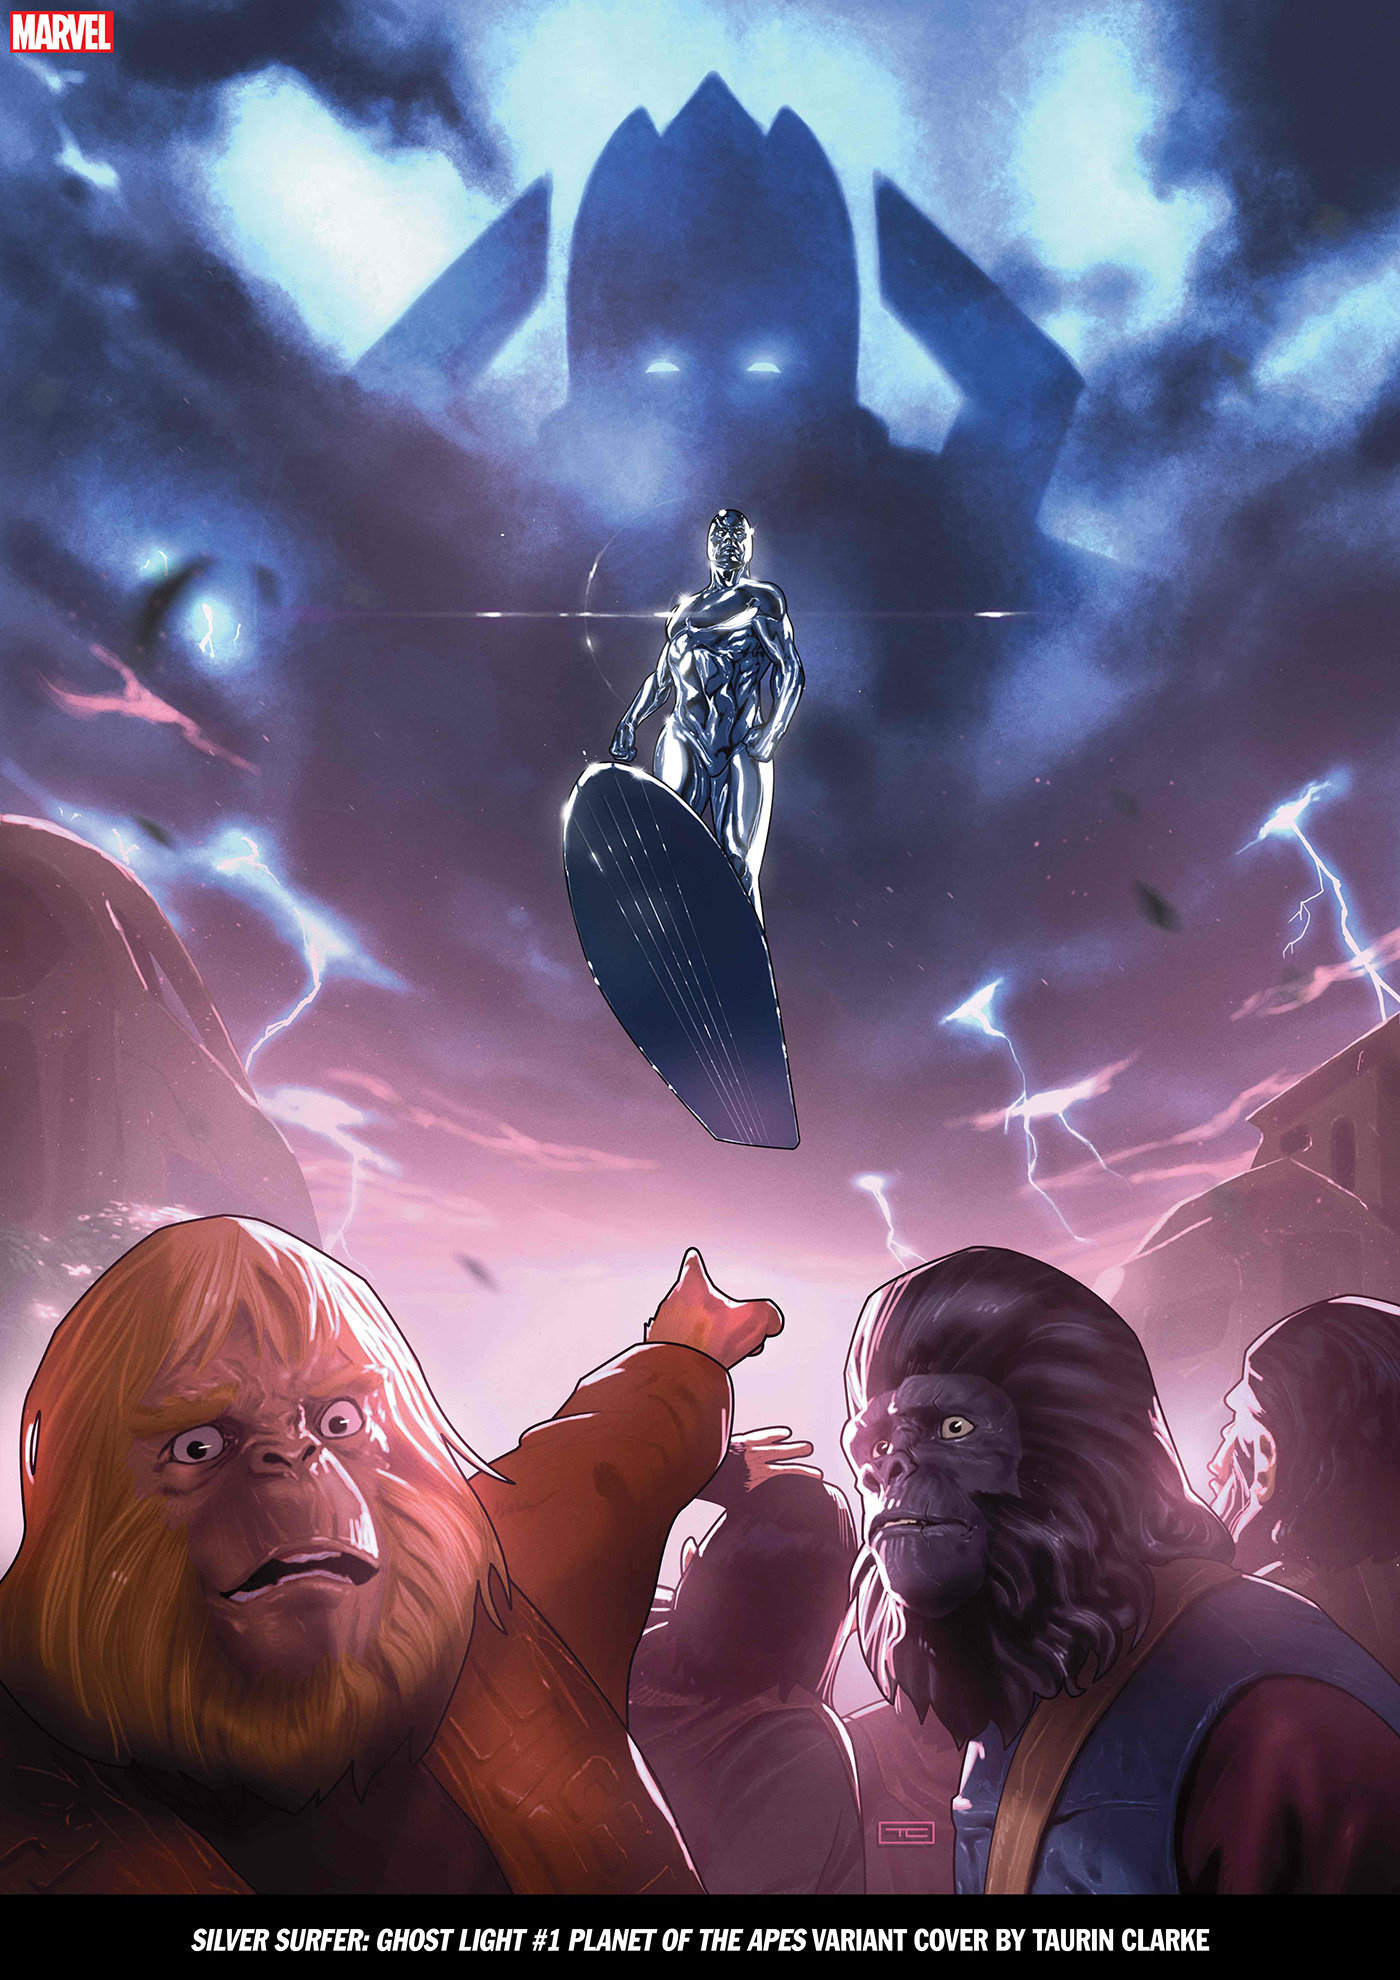 Silver Surfer Ghost Light #1 Clarke Planet of the Apes Variant